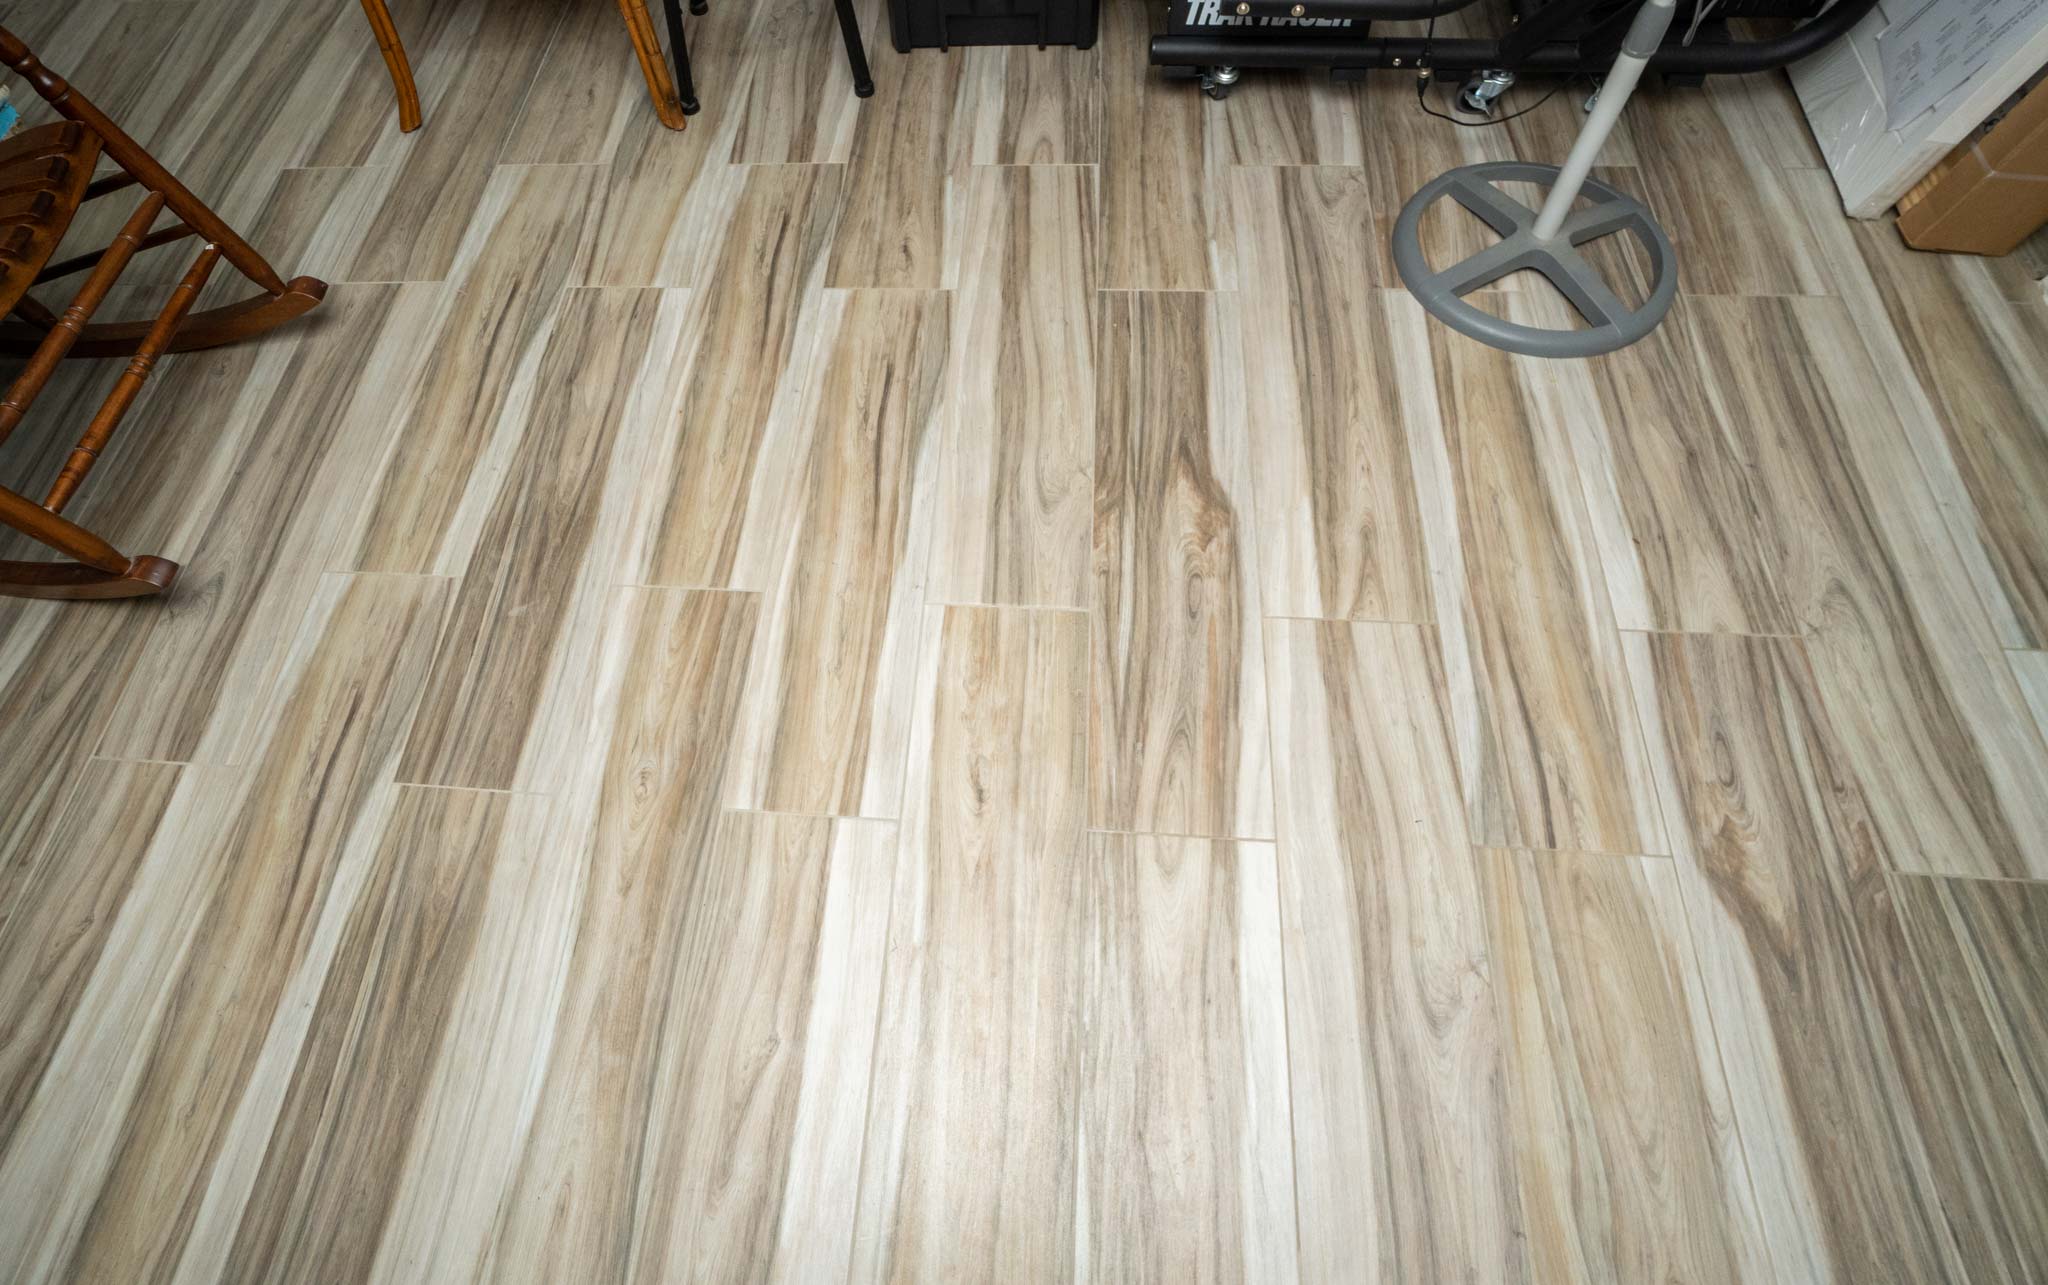 How To Clean Sticky Floors Country, How To Clean Sticky Dirty Hardwood Floors